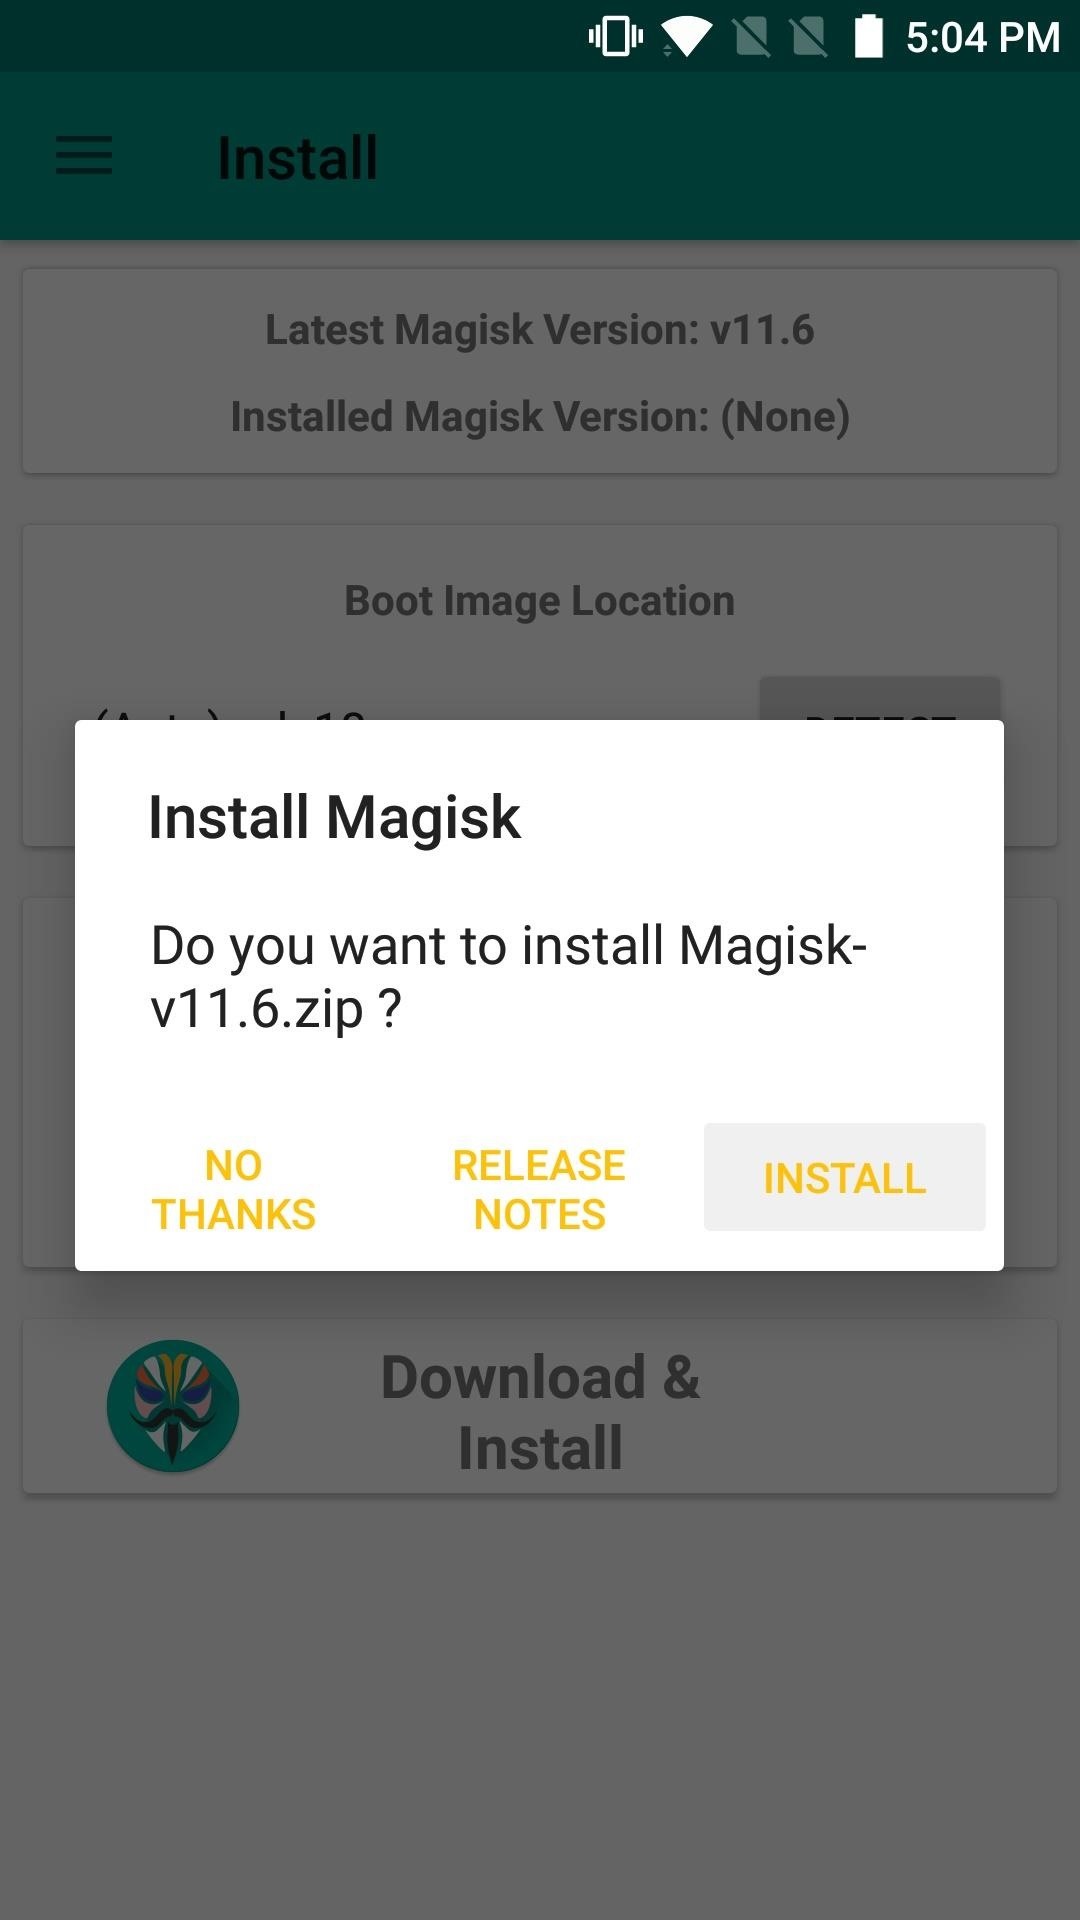 Magisk 101: How to Install Magisk on Your Rooted Android Device